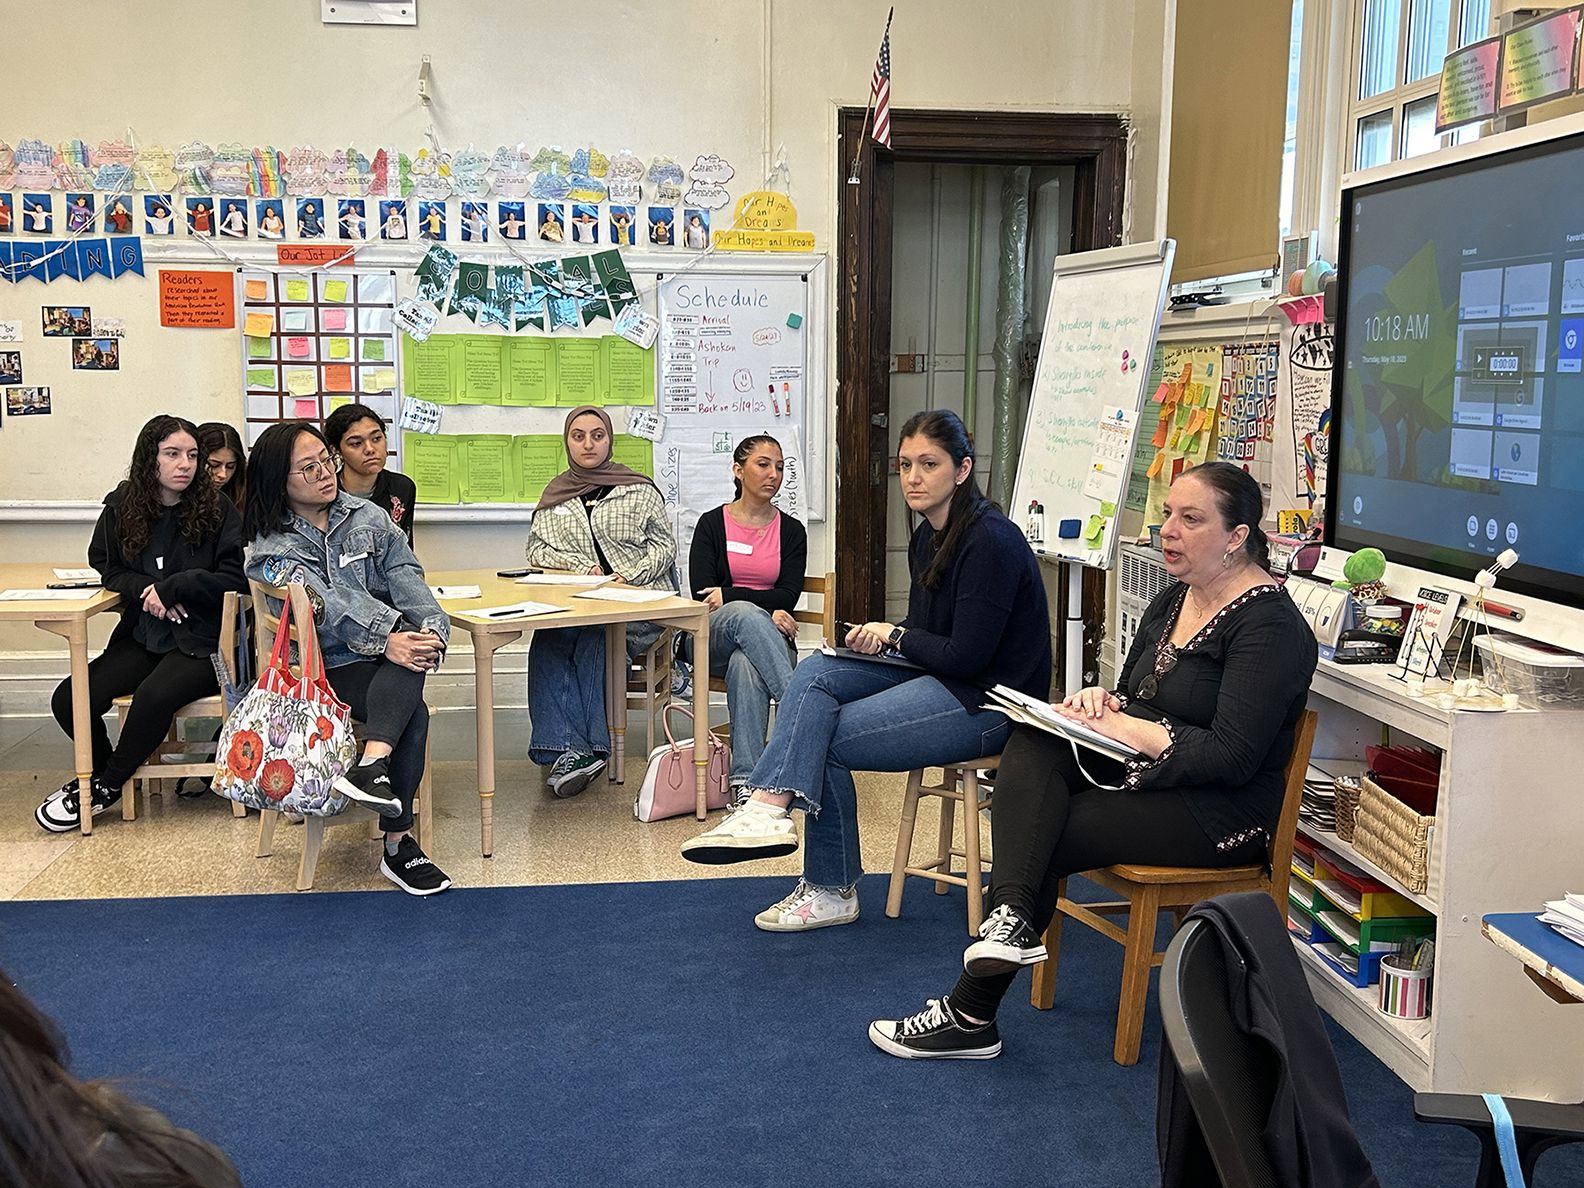 The Early Childhood Program student teachers visit PS 290 in Manhattan, where they participated in a literacy workshop and interactive learning experience.